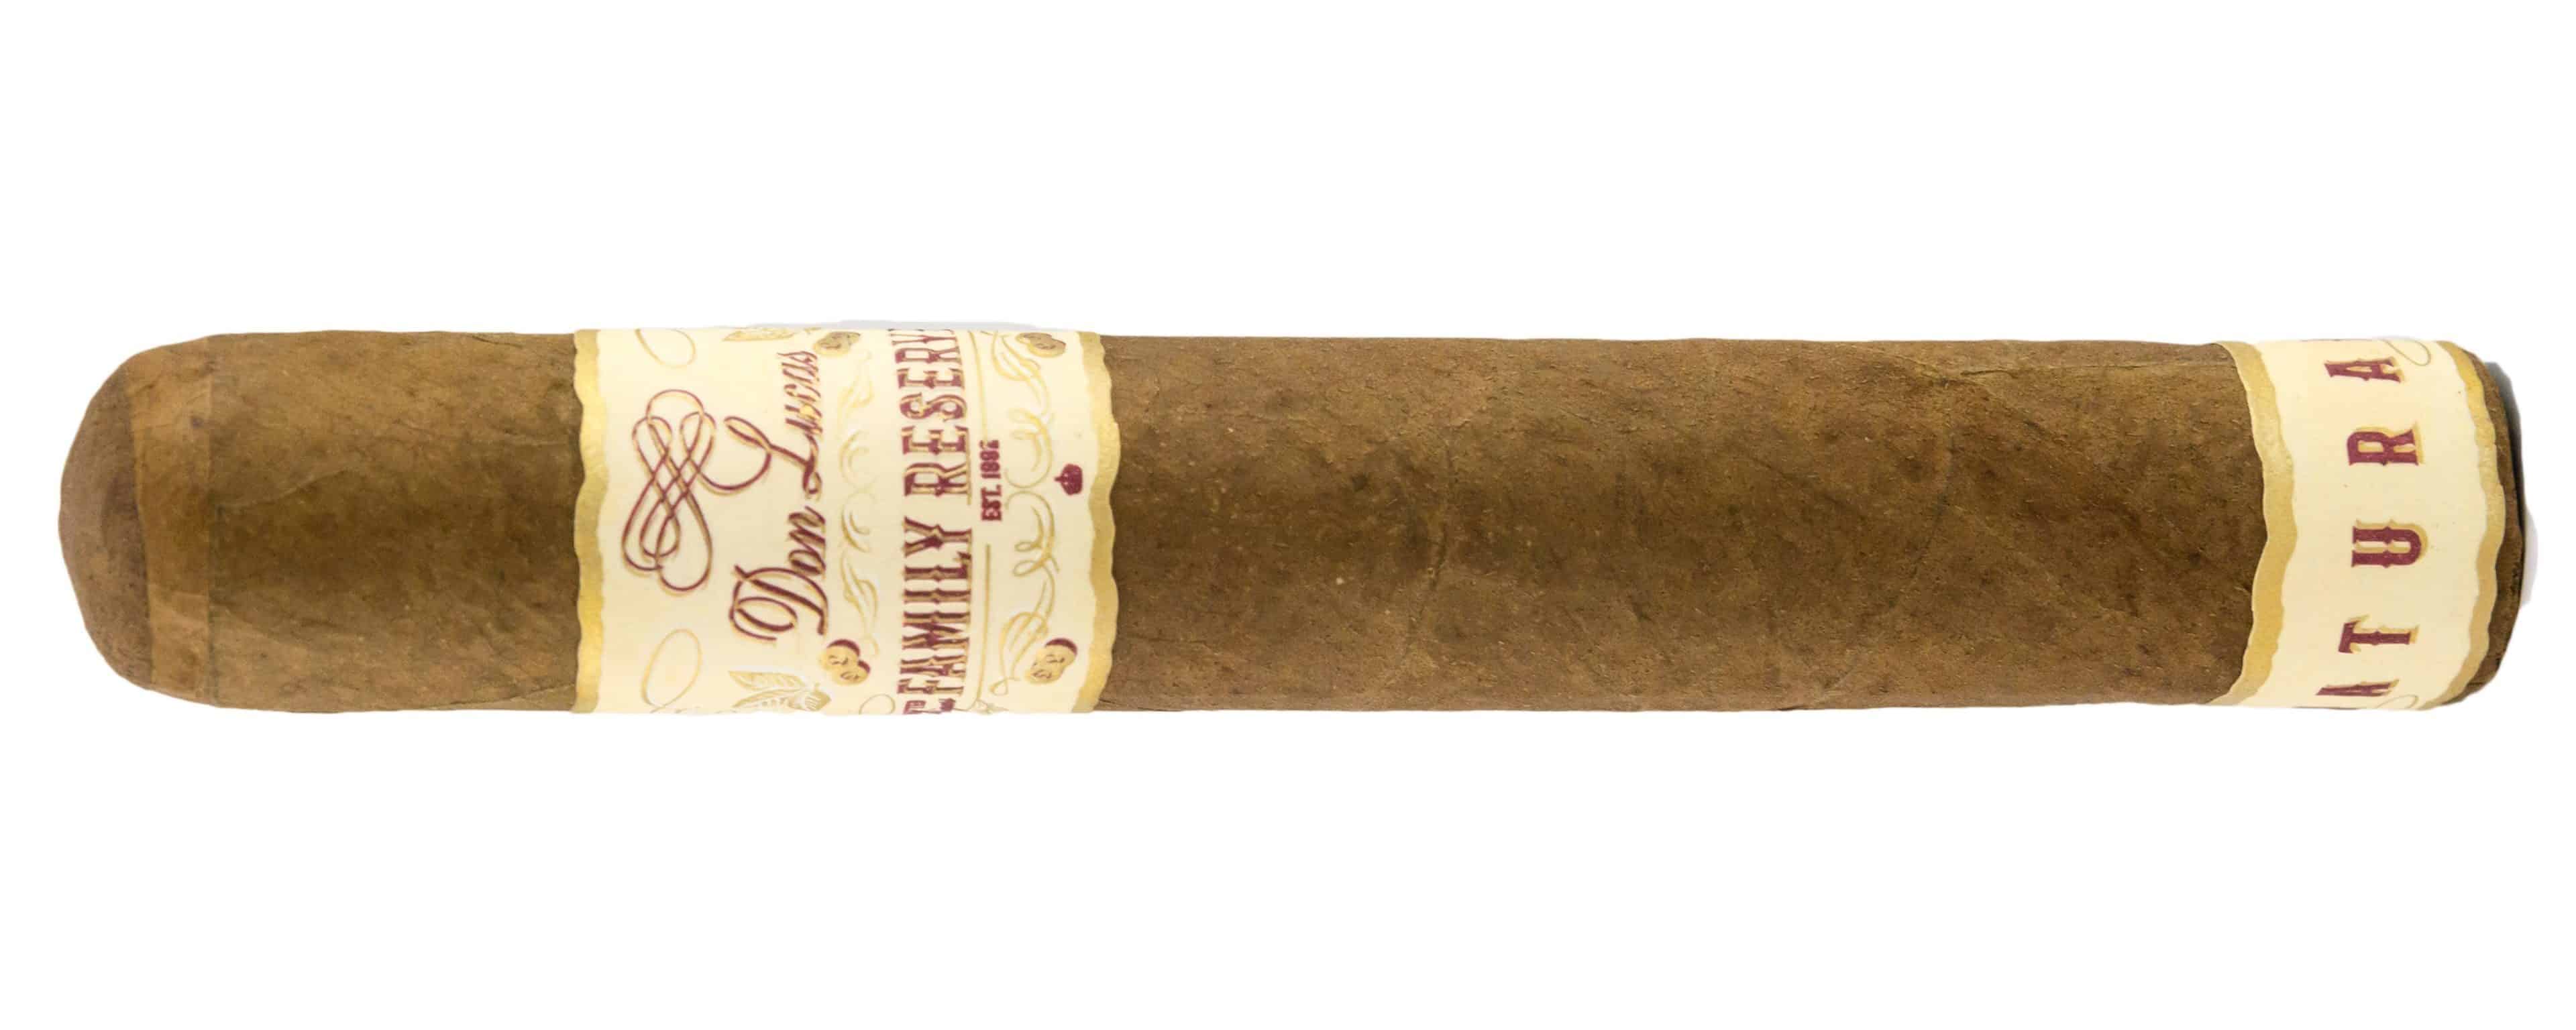 Blind Cigar Review: Don Lucas | Family Reserve Natural